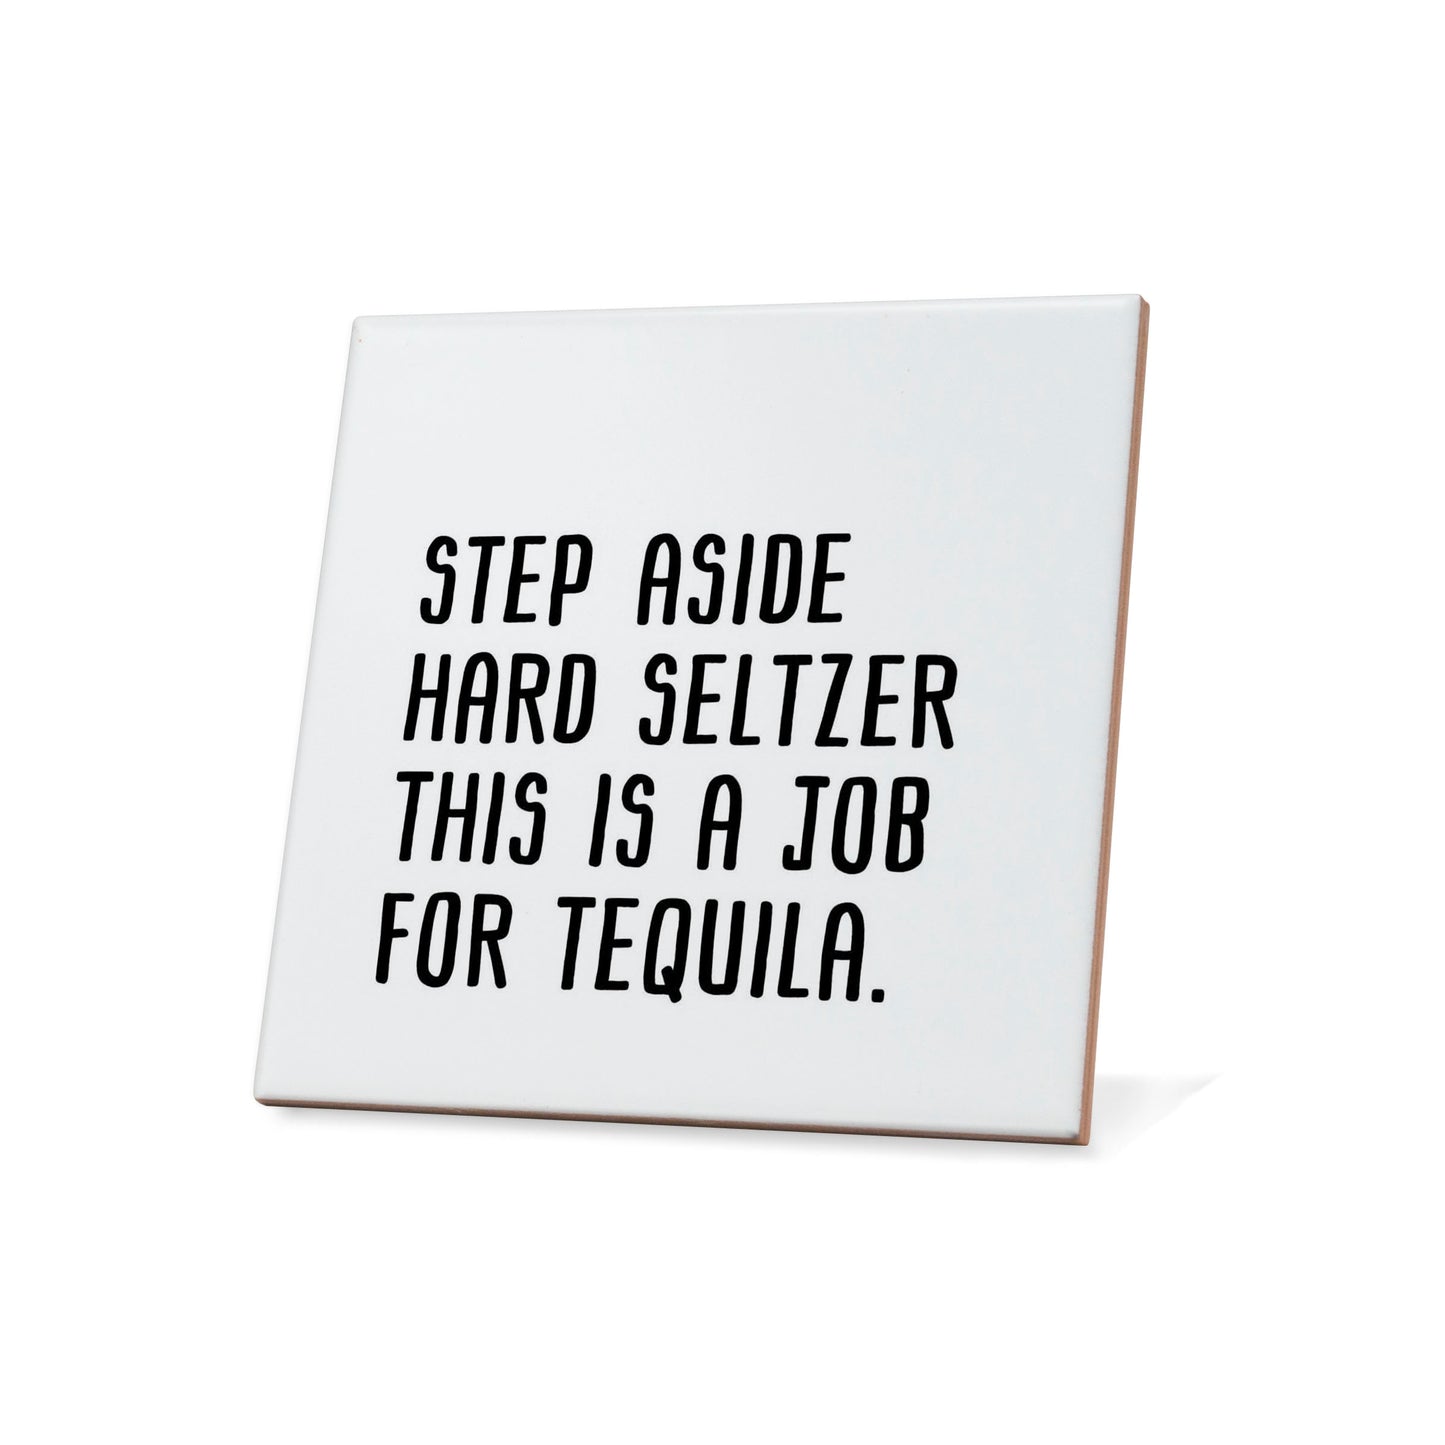 Step aside hard seltzer this is a job for tequila Quote Coaster